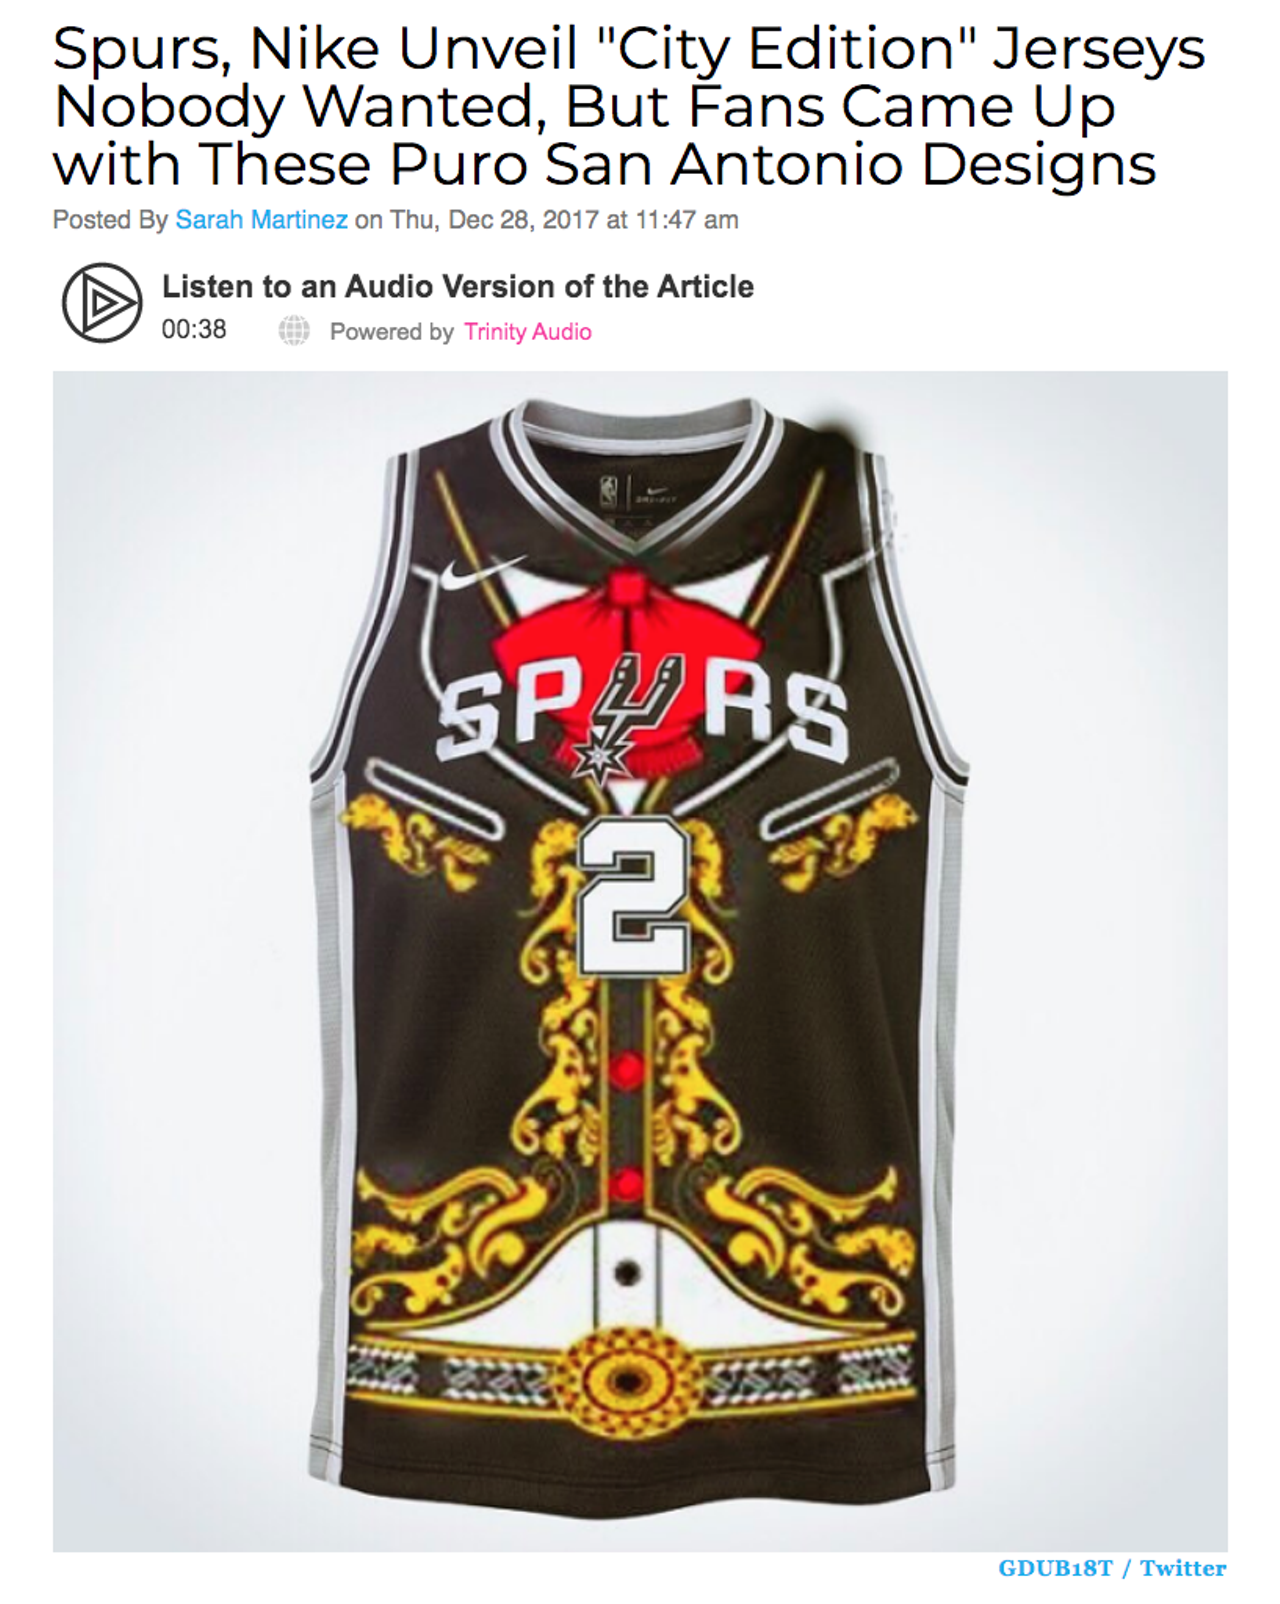 After folks were disappointed by the City Edition Spurs jerseys, puro peeps came through with these inspired designs. Read more here.